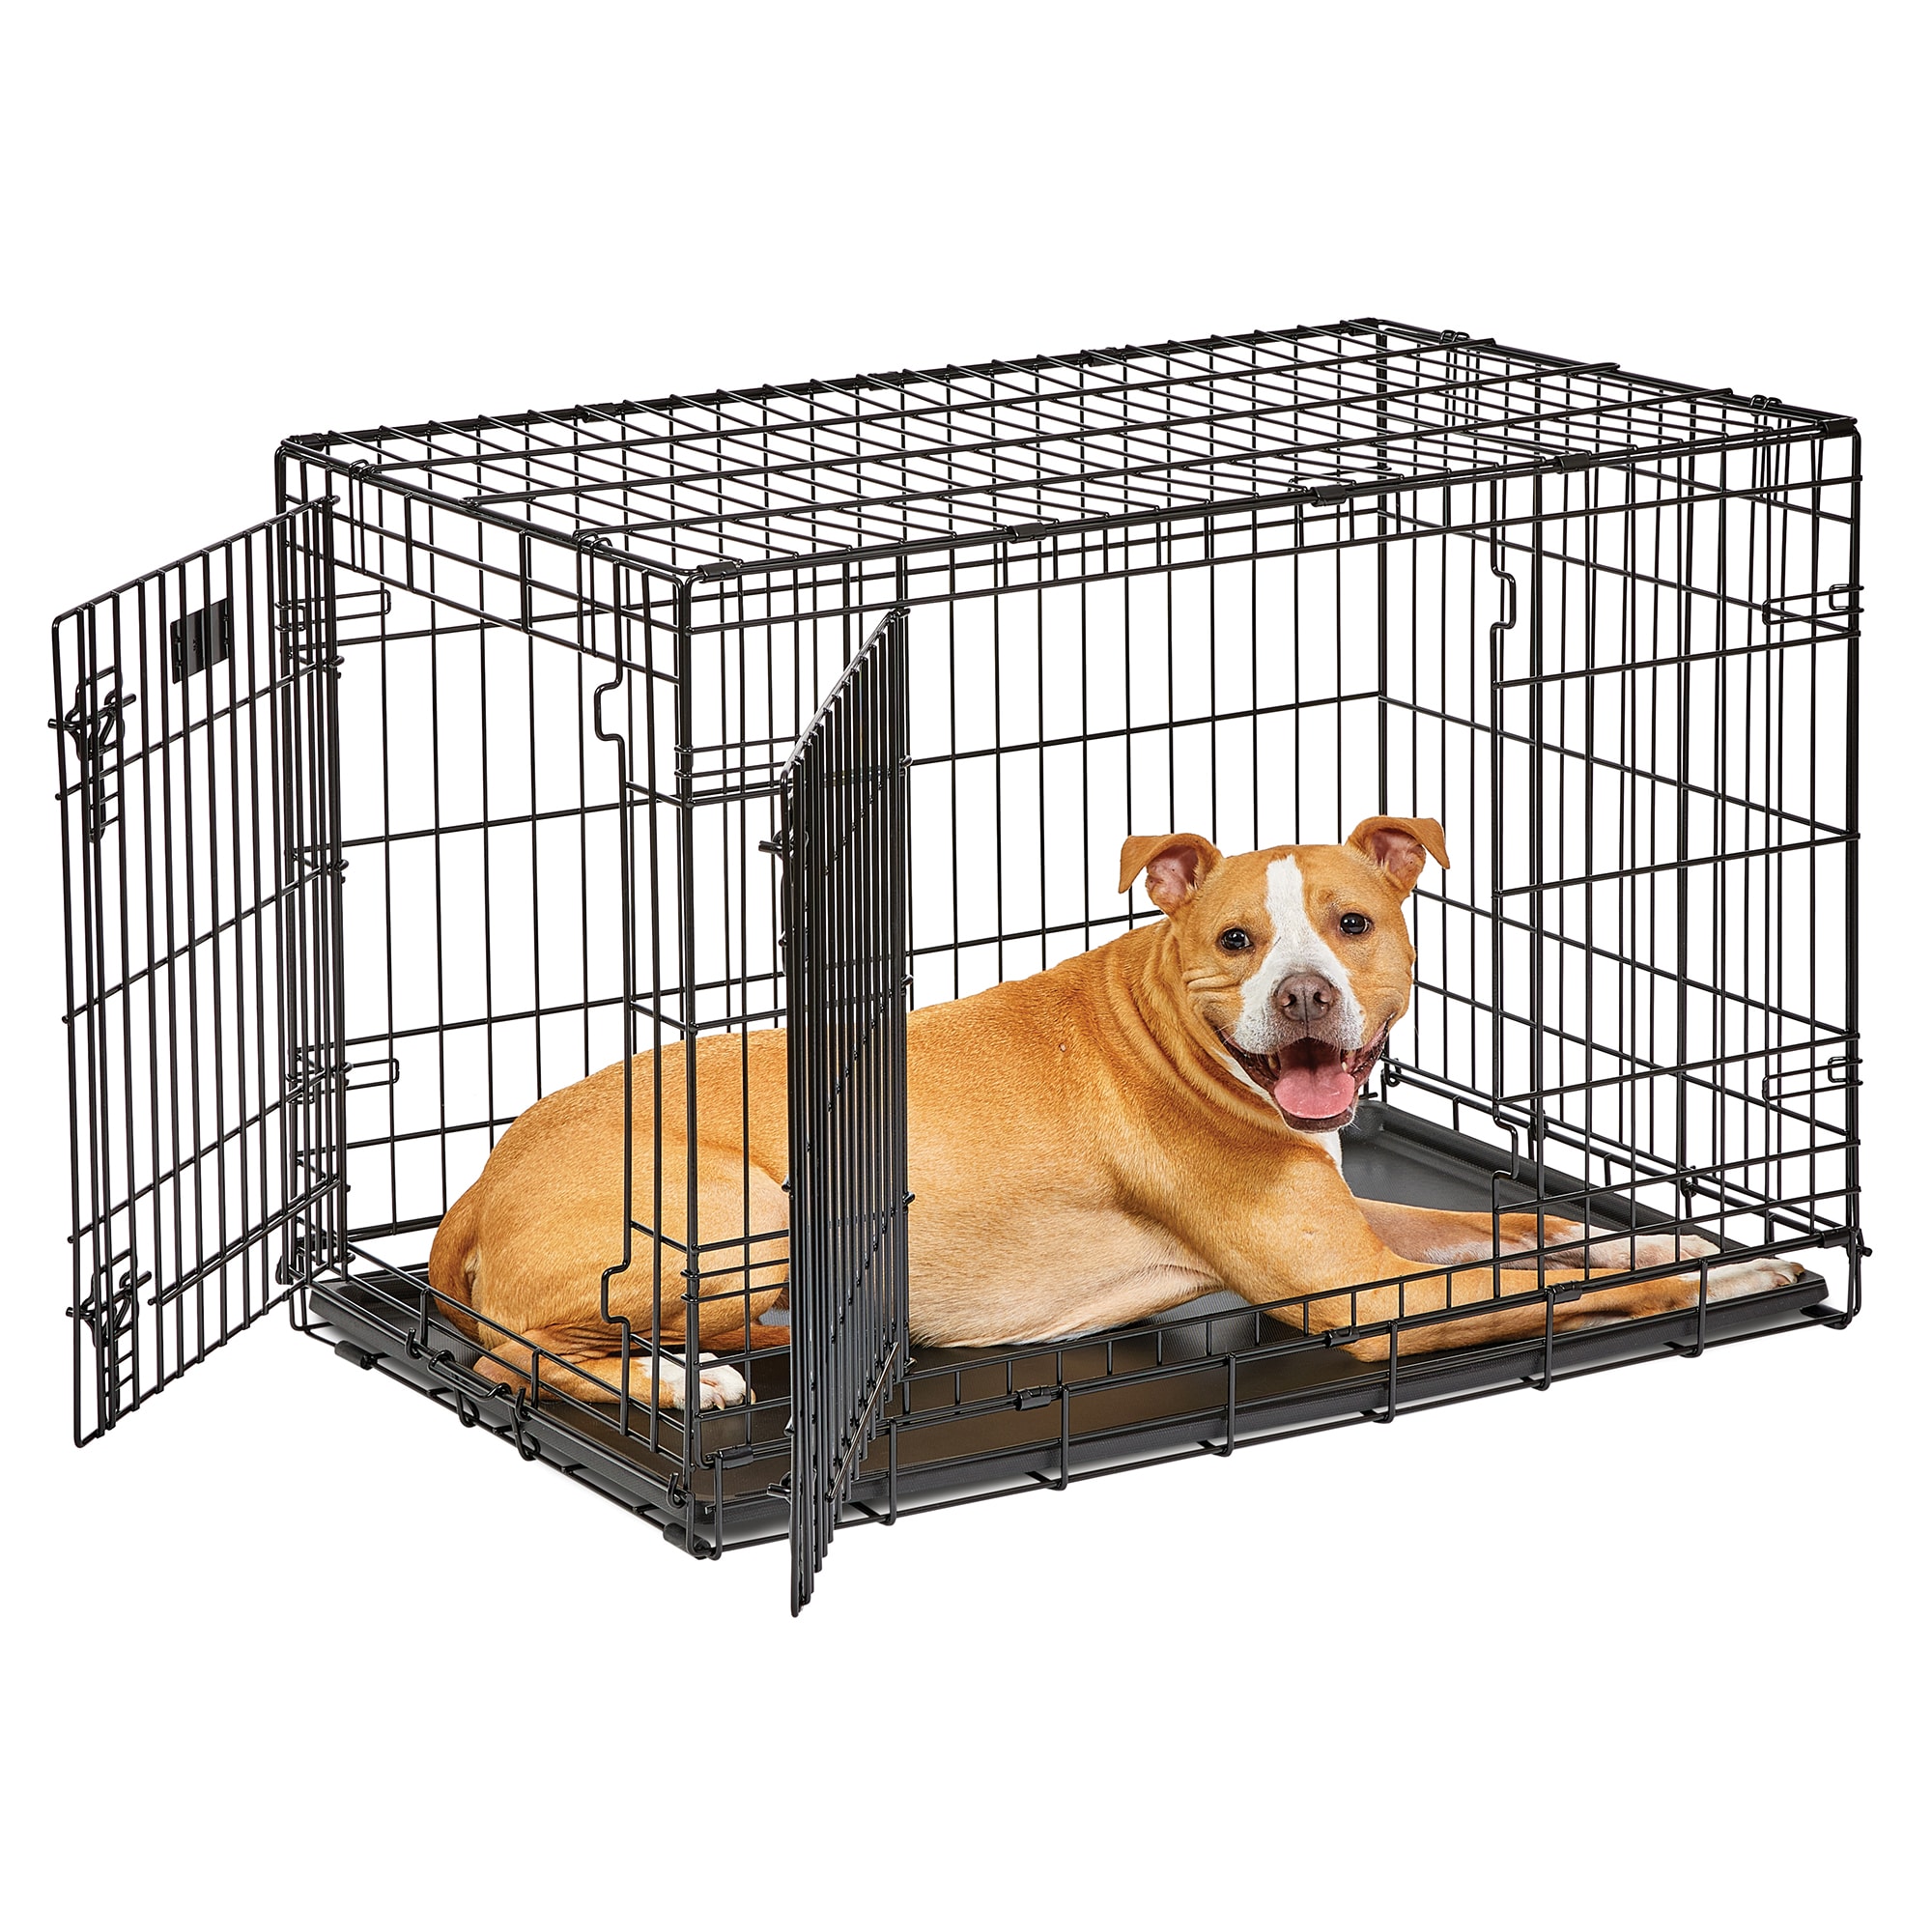 Fully Equipped iCrate Single Door & Double Door Folding Metal Dog Crates MidWest Homes for Pets Dog Crate 